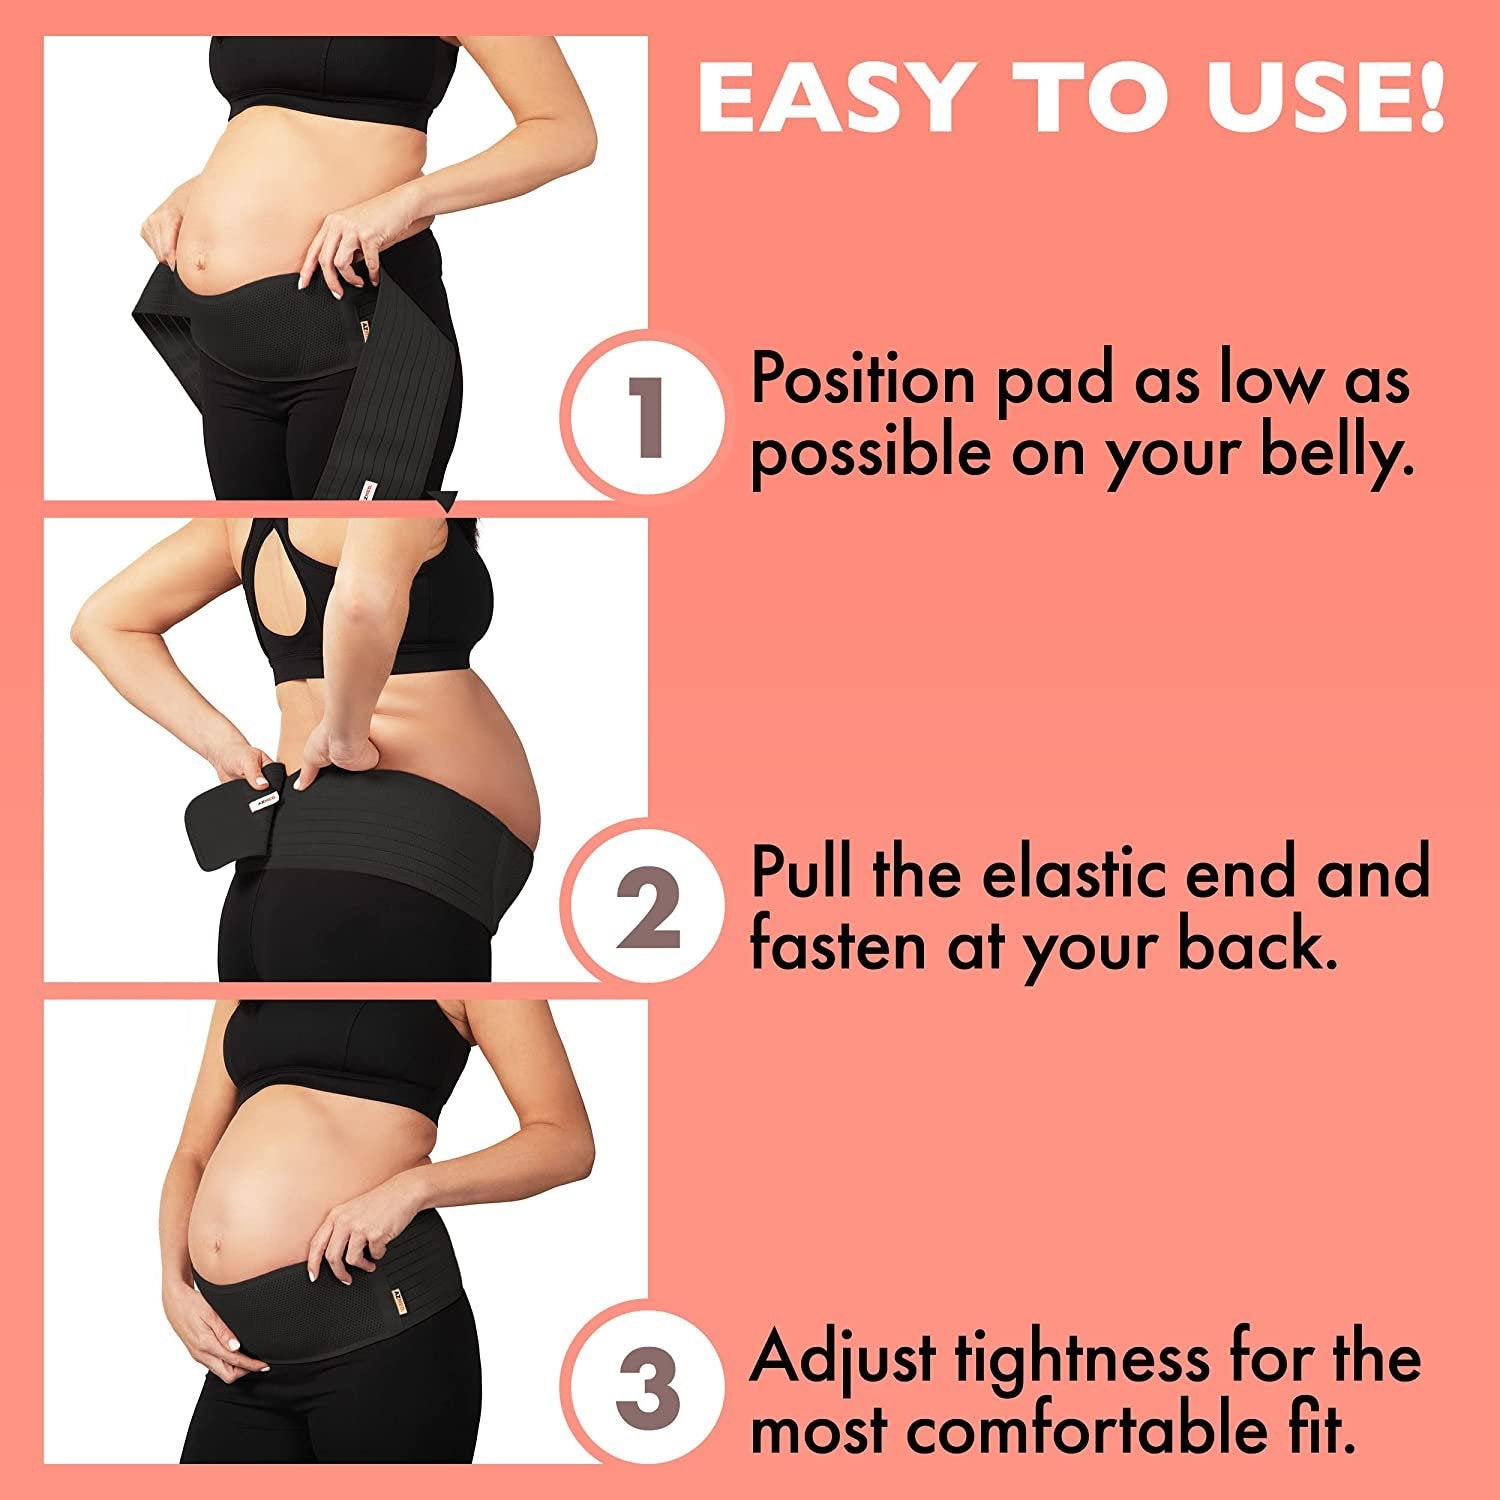 AZMED Maternity Belly Band Black | Breathable Pregnancy Support | Adjustable Belt for All Stages | One Size